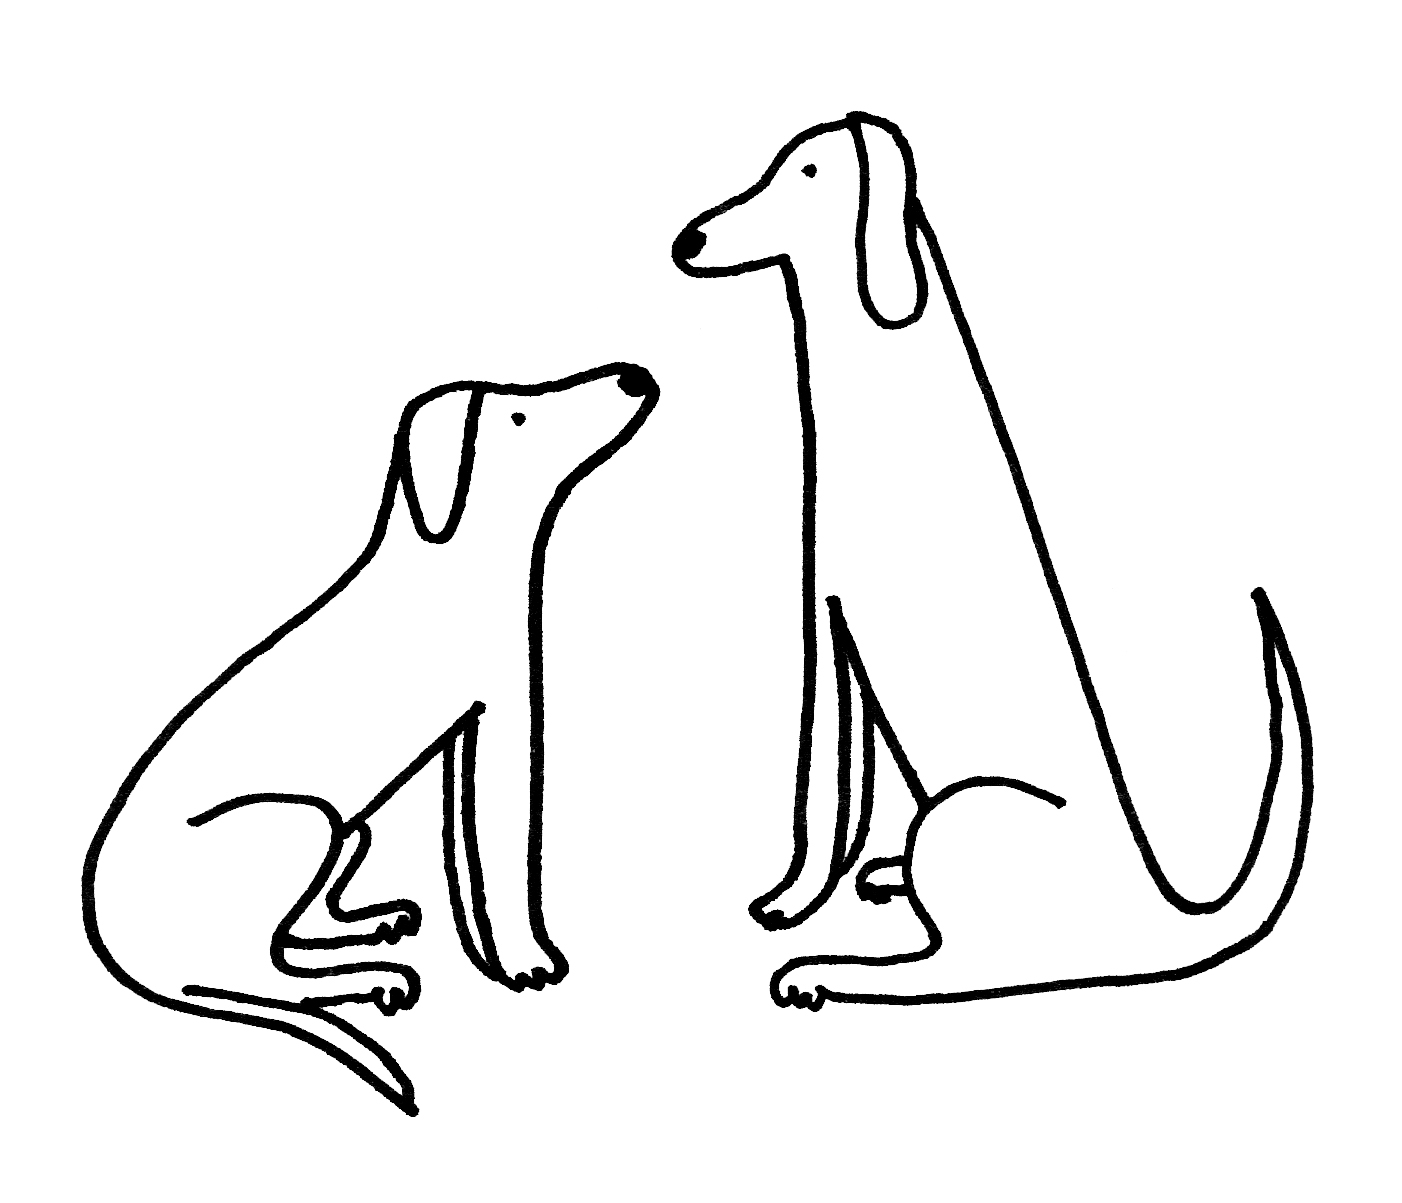 A drawing of two dogs looking at each other. 